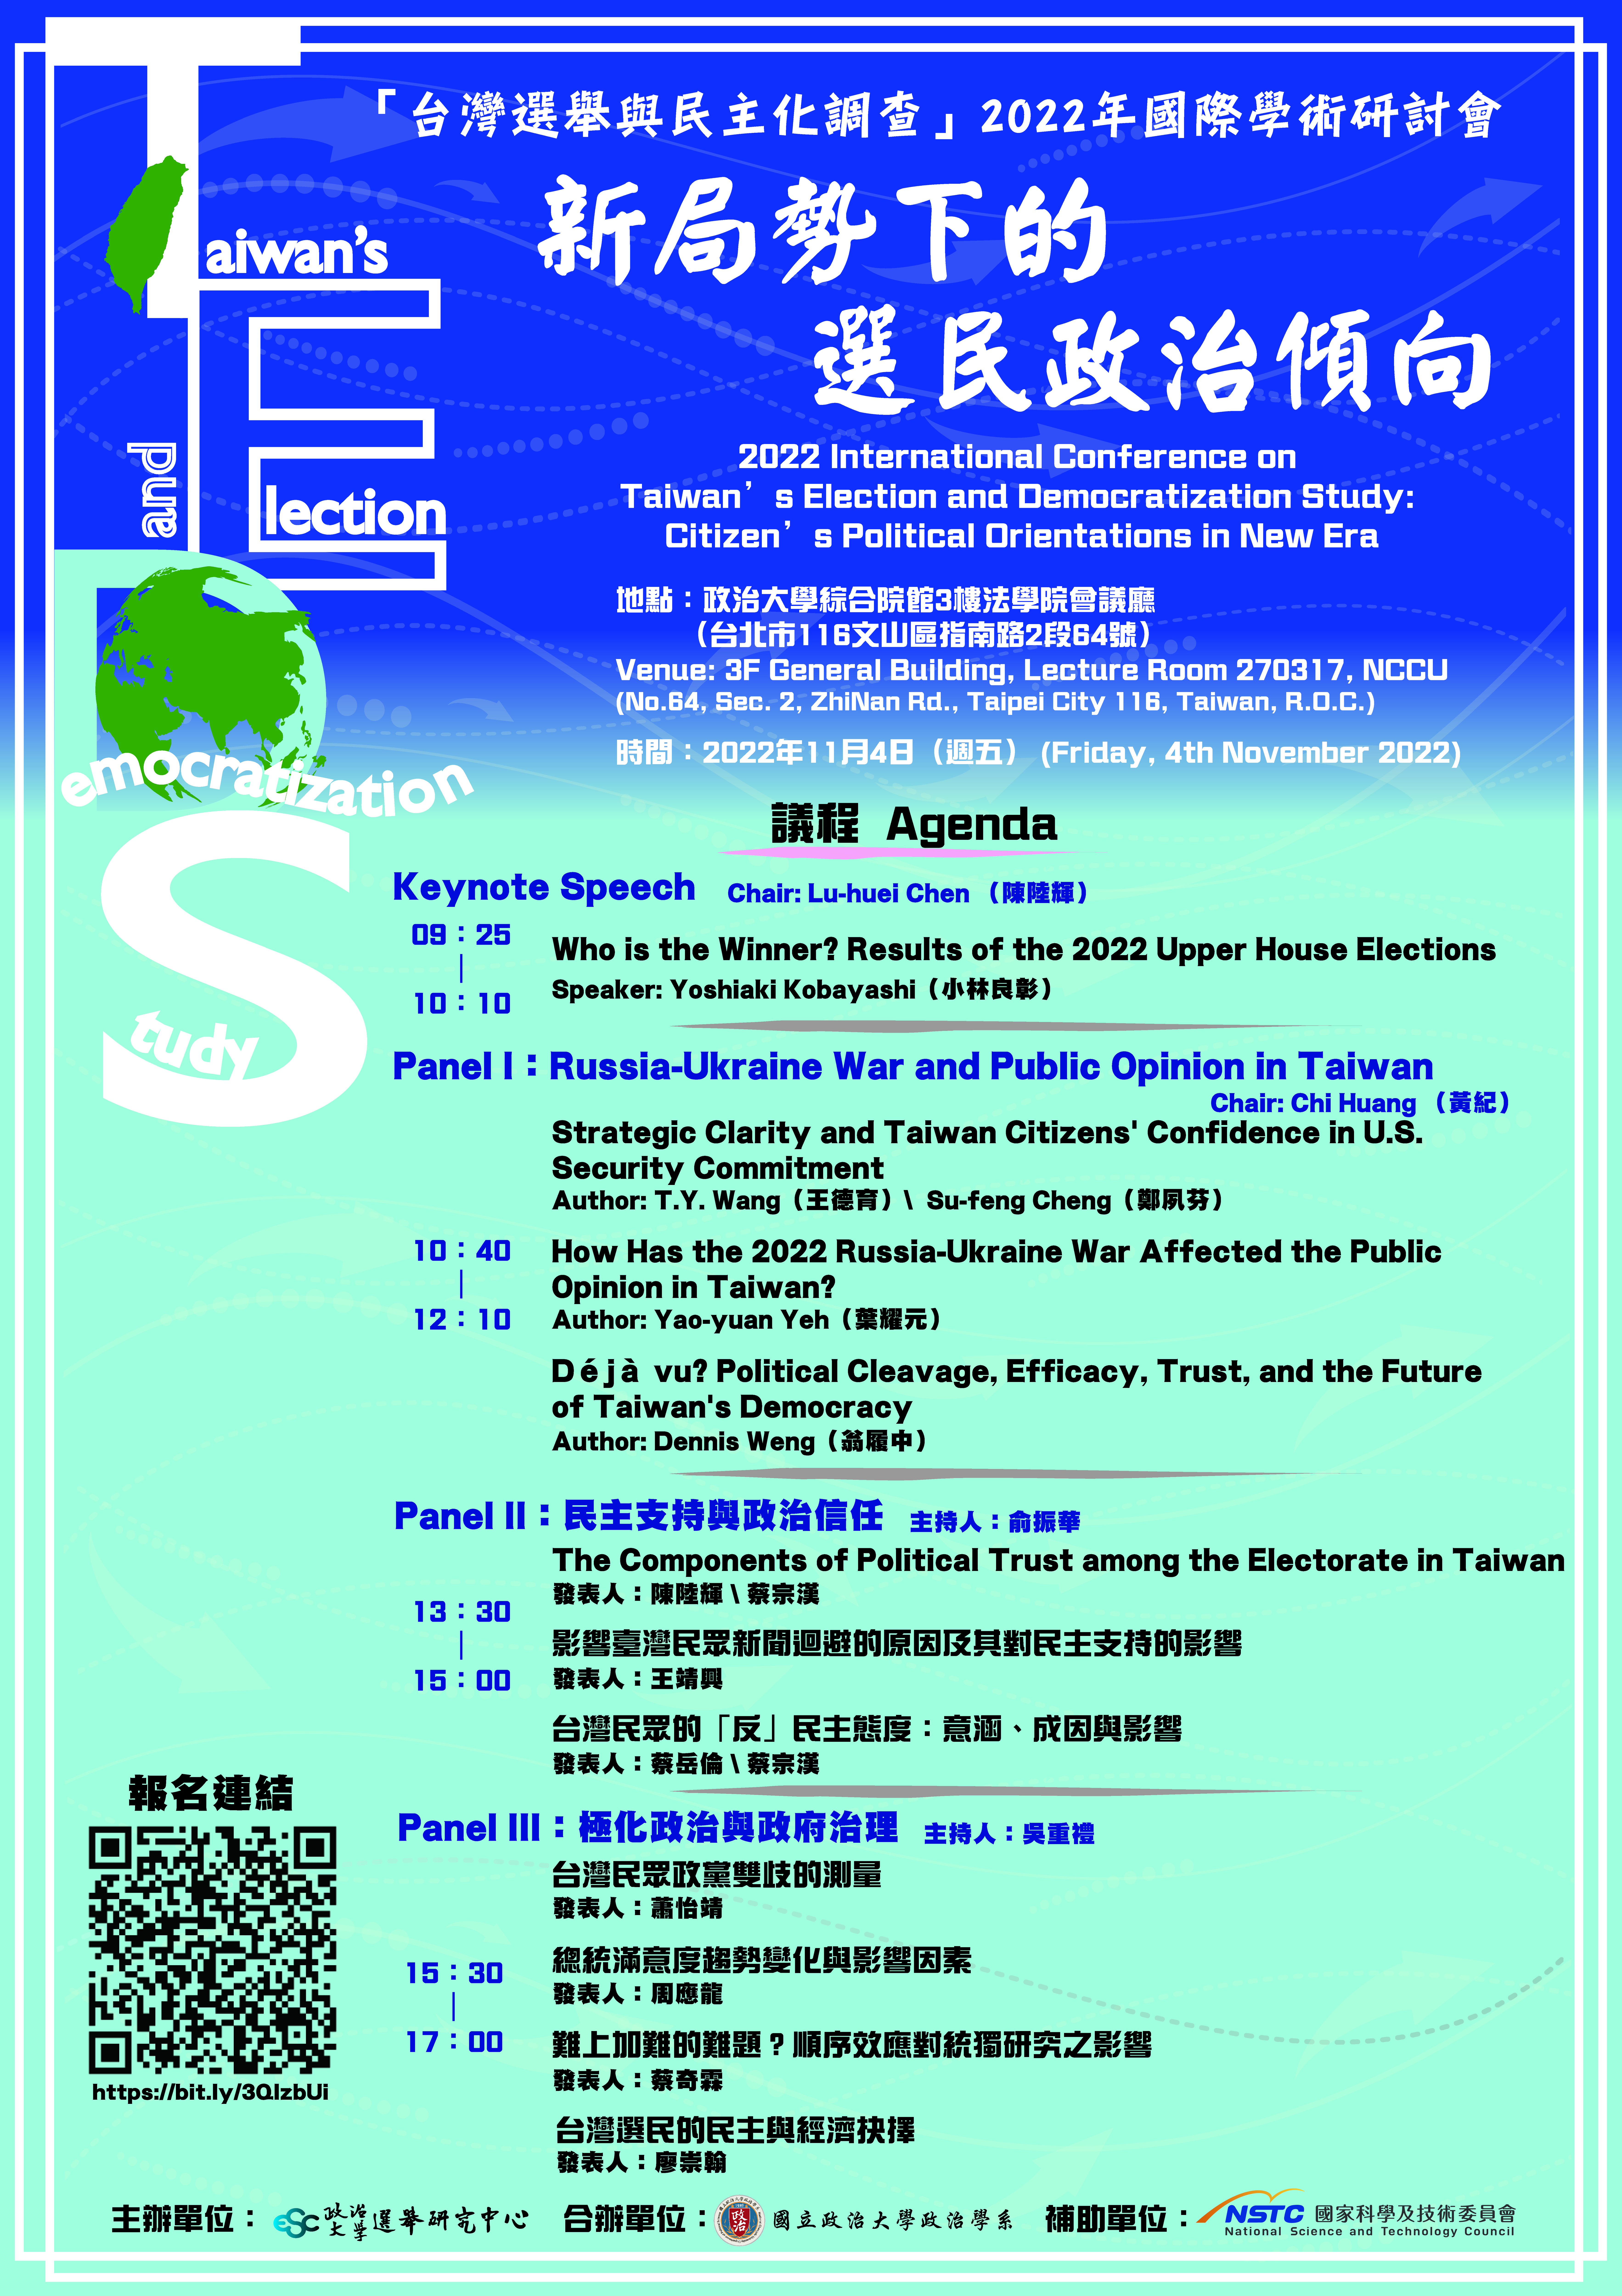 2022 International Conference on Taiwan’s Election and Democratization Study: Citizen’s Political Orientations in New Era